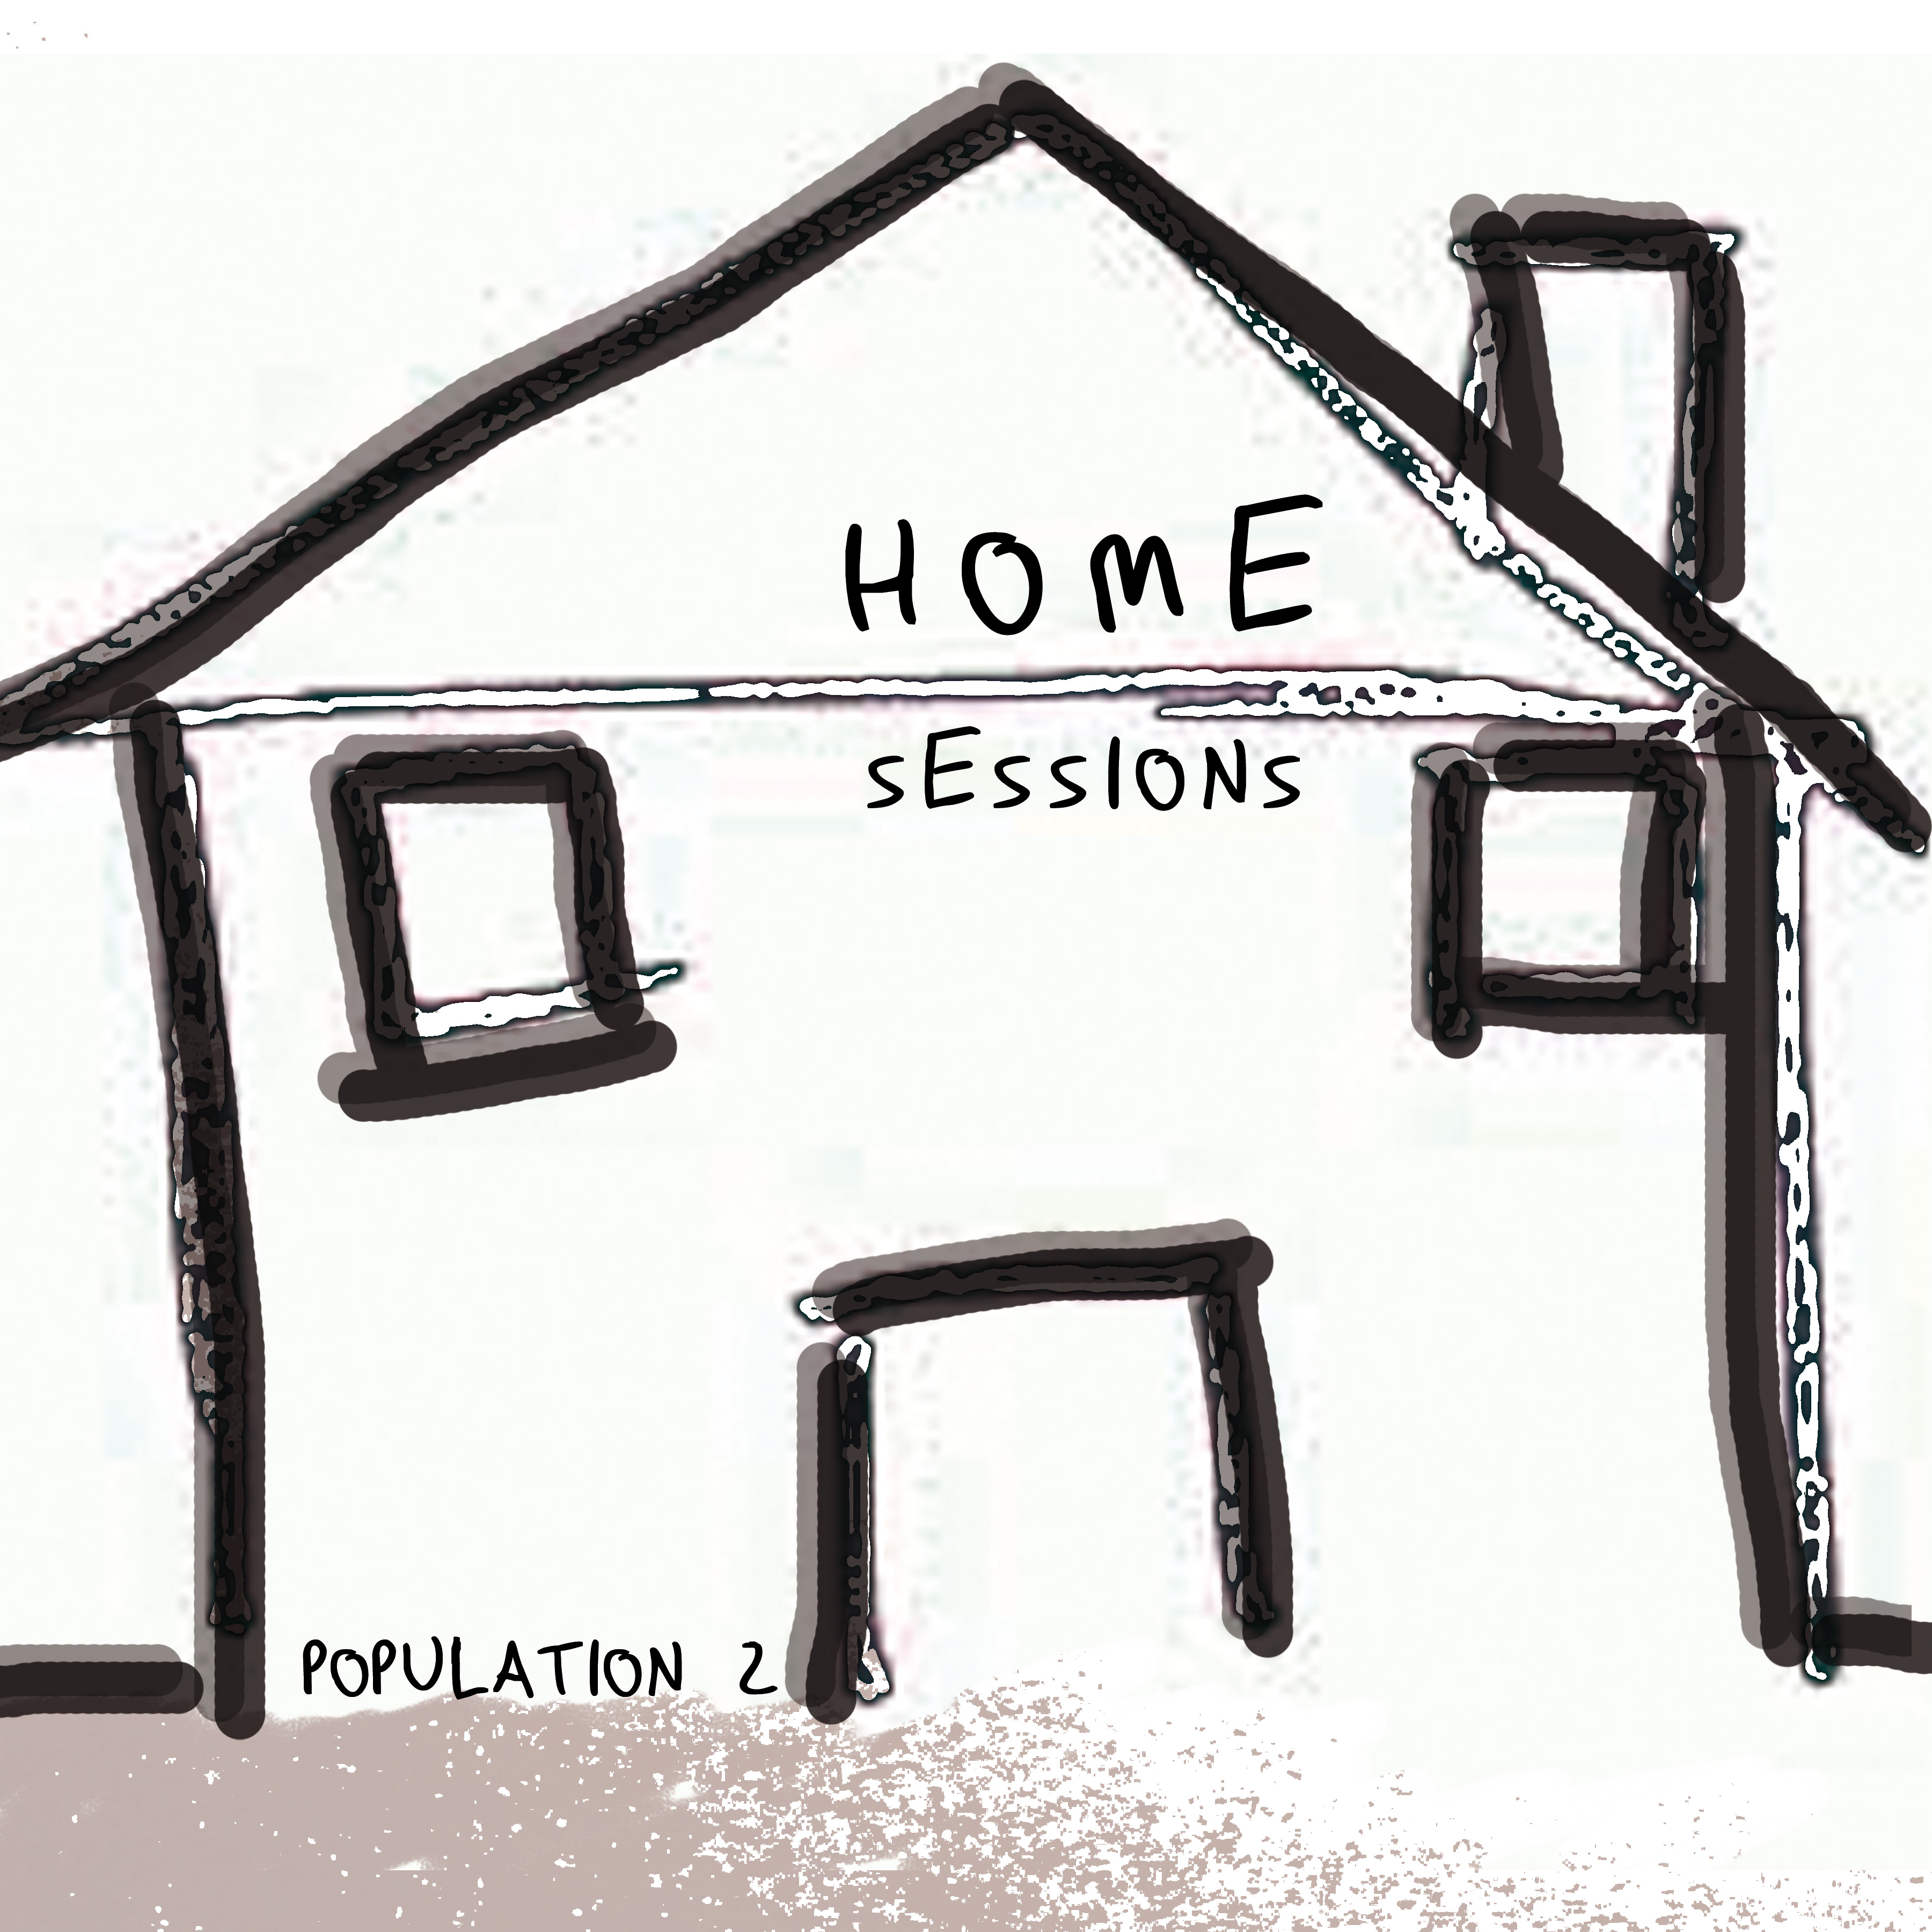 POPULATION 2 – HOME SESSIONS